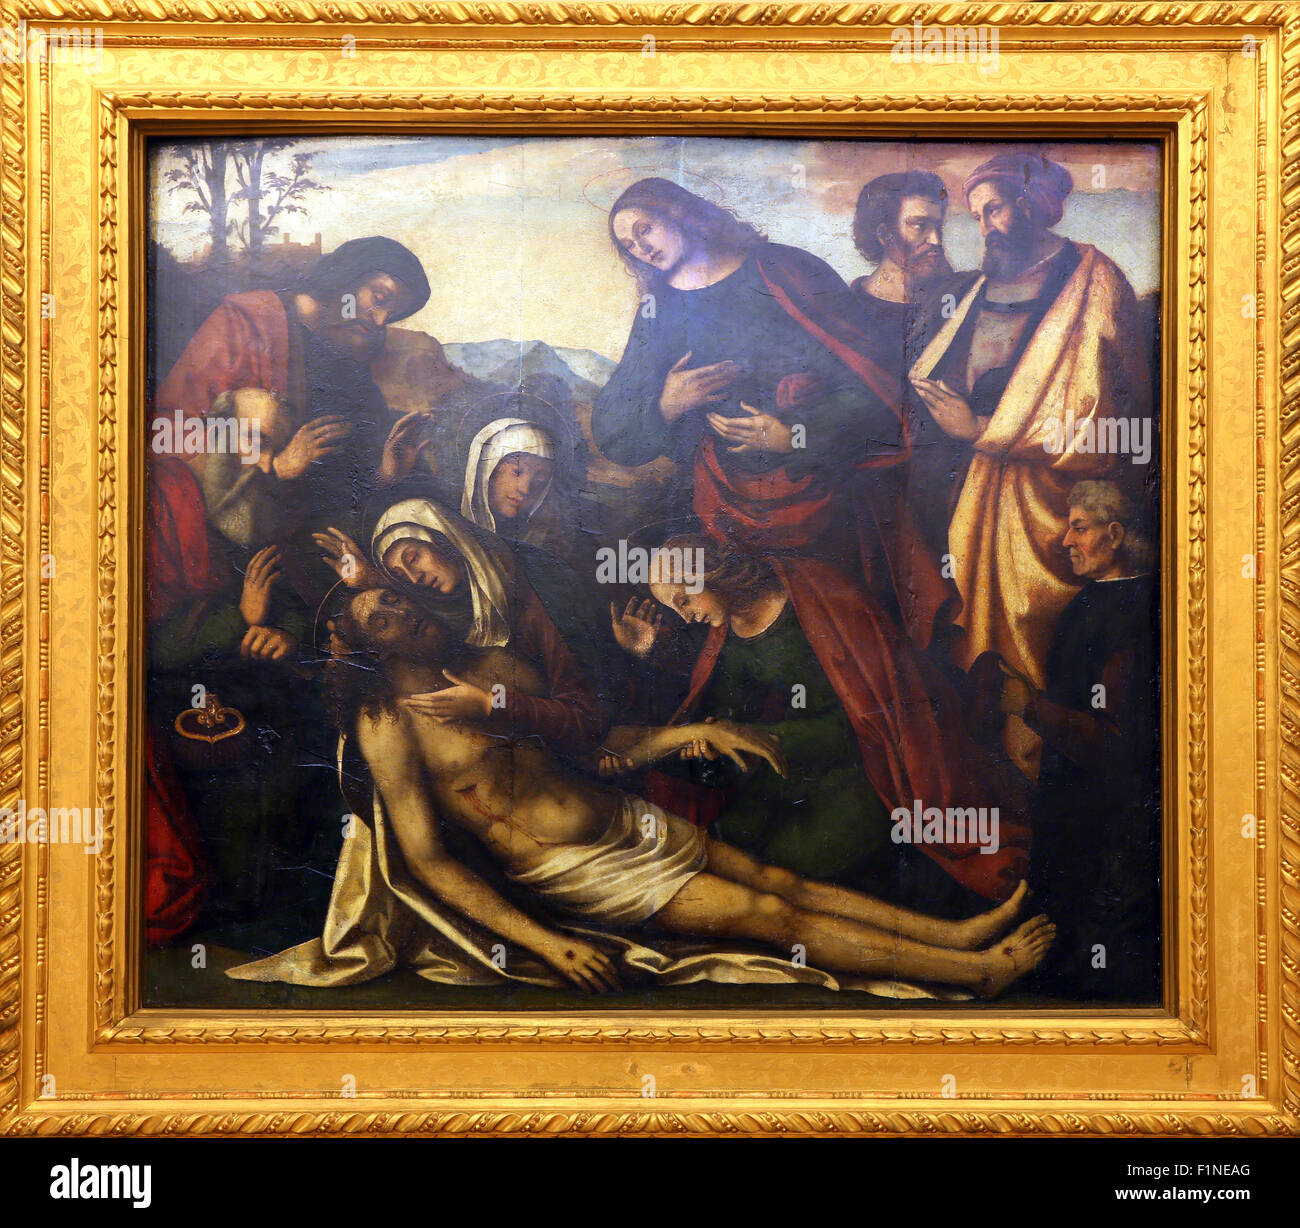 Benedetto Coda: Lamentation of Christ, Old Masters Collection, Croatian ...